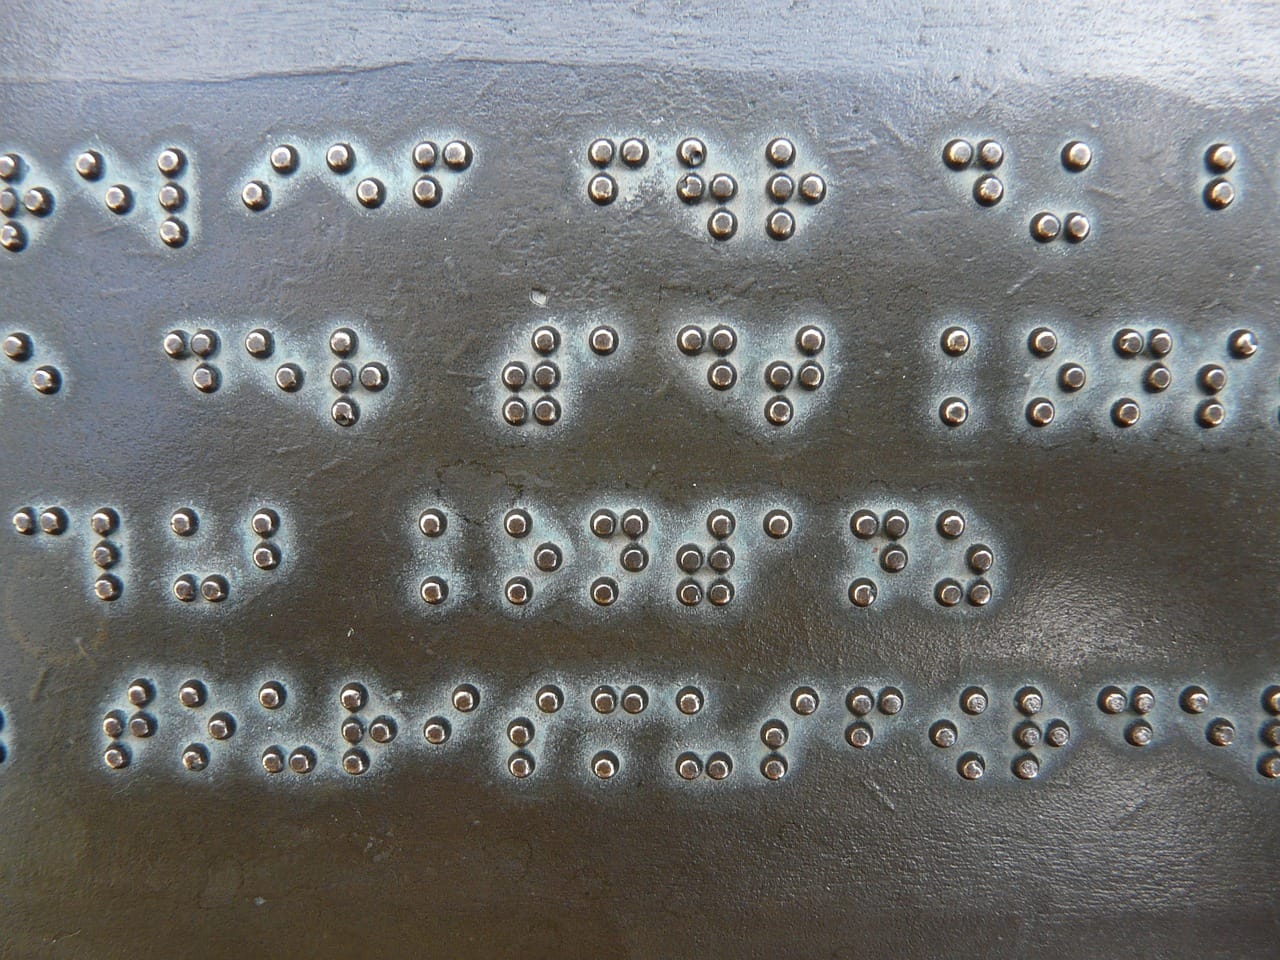 Braille writing for specially abled people